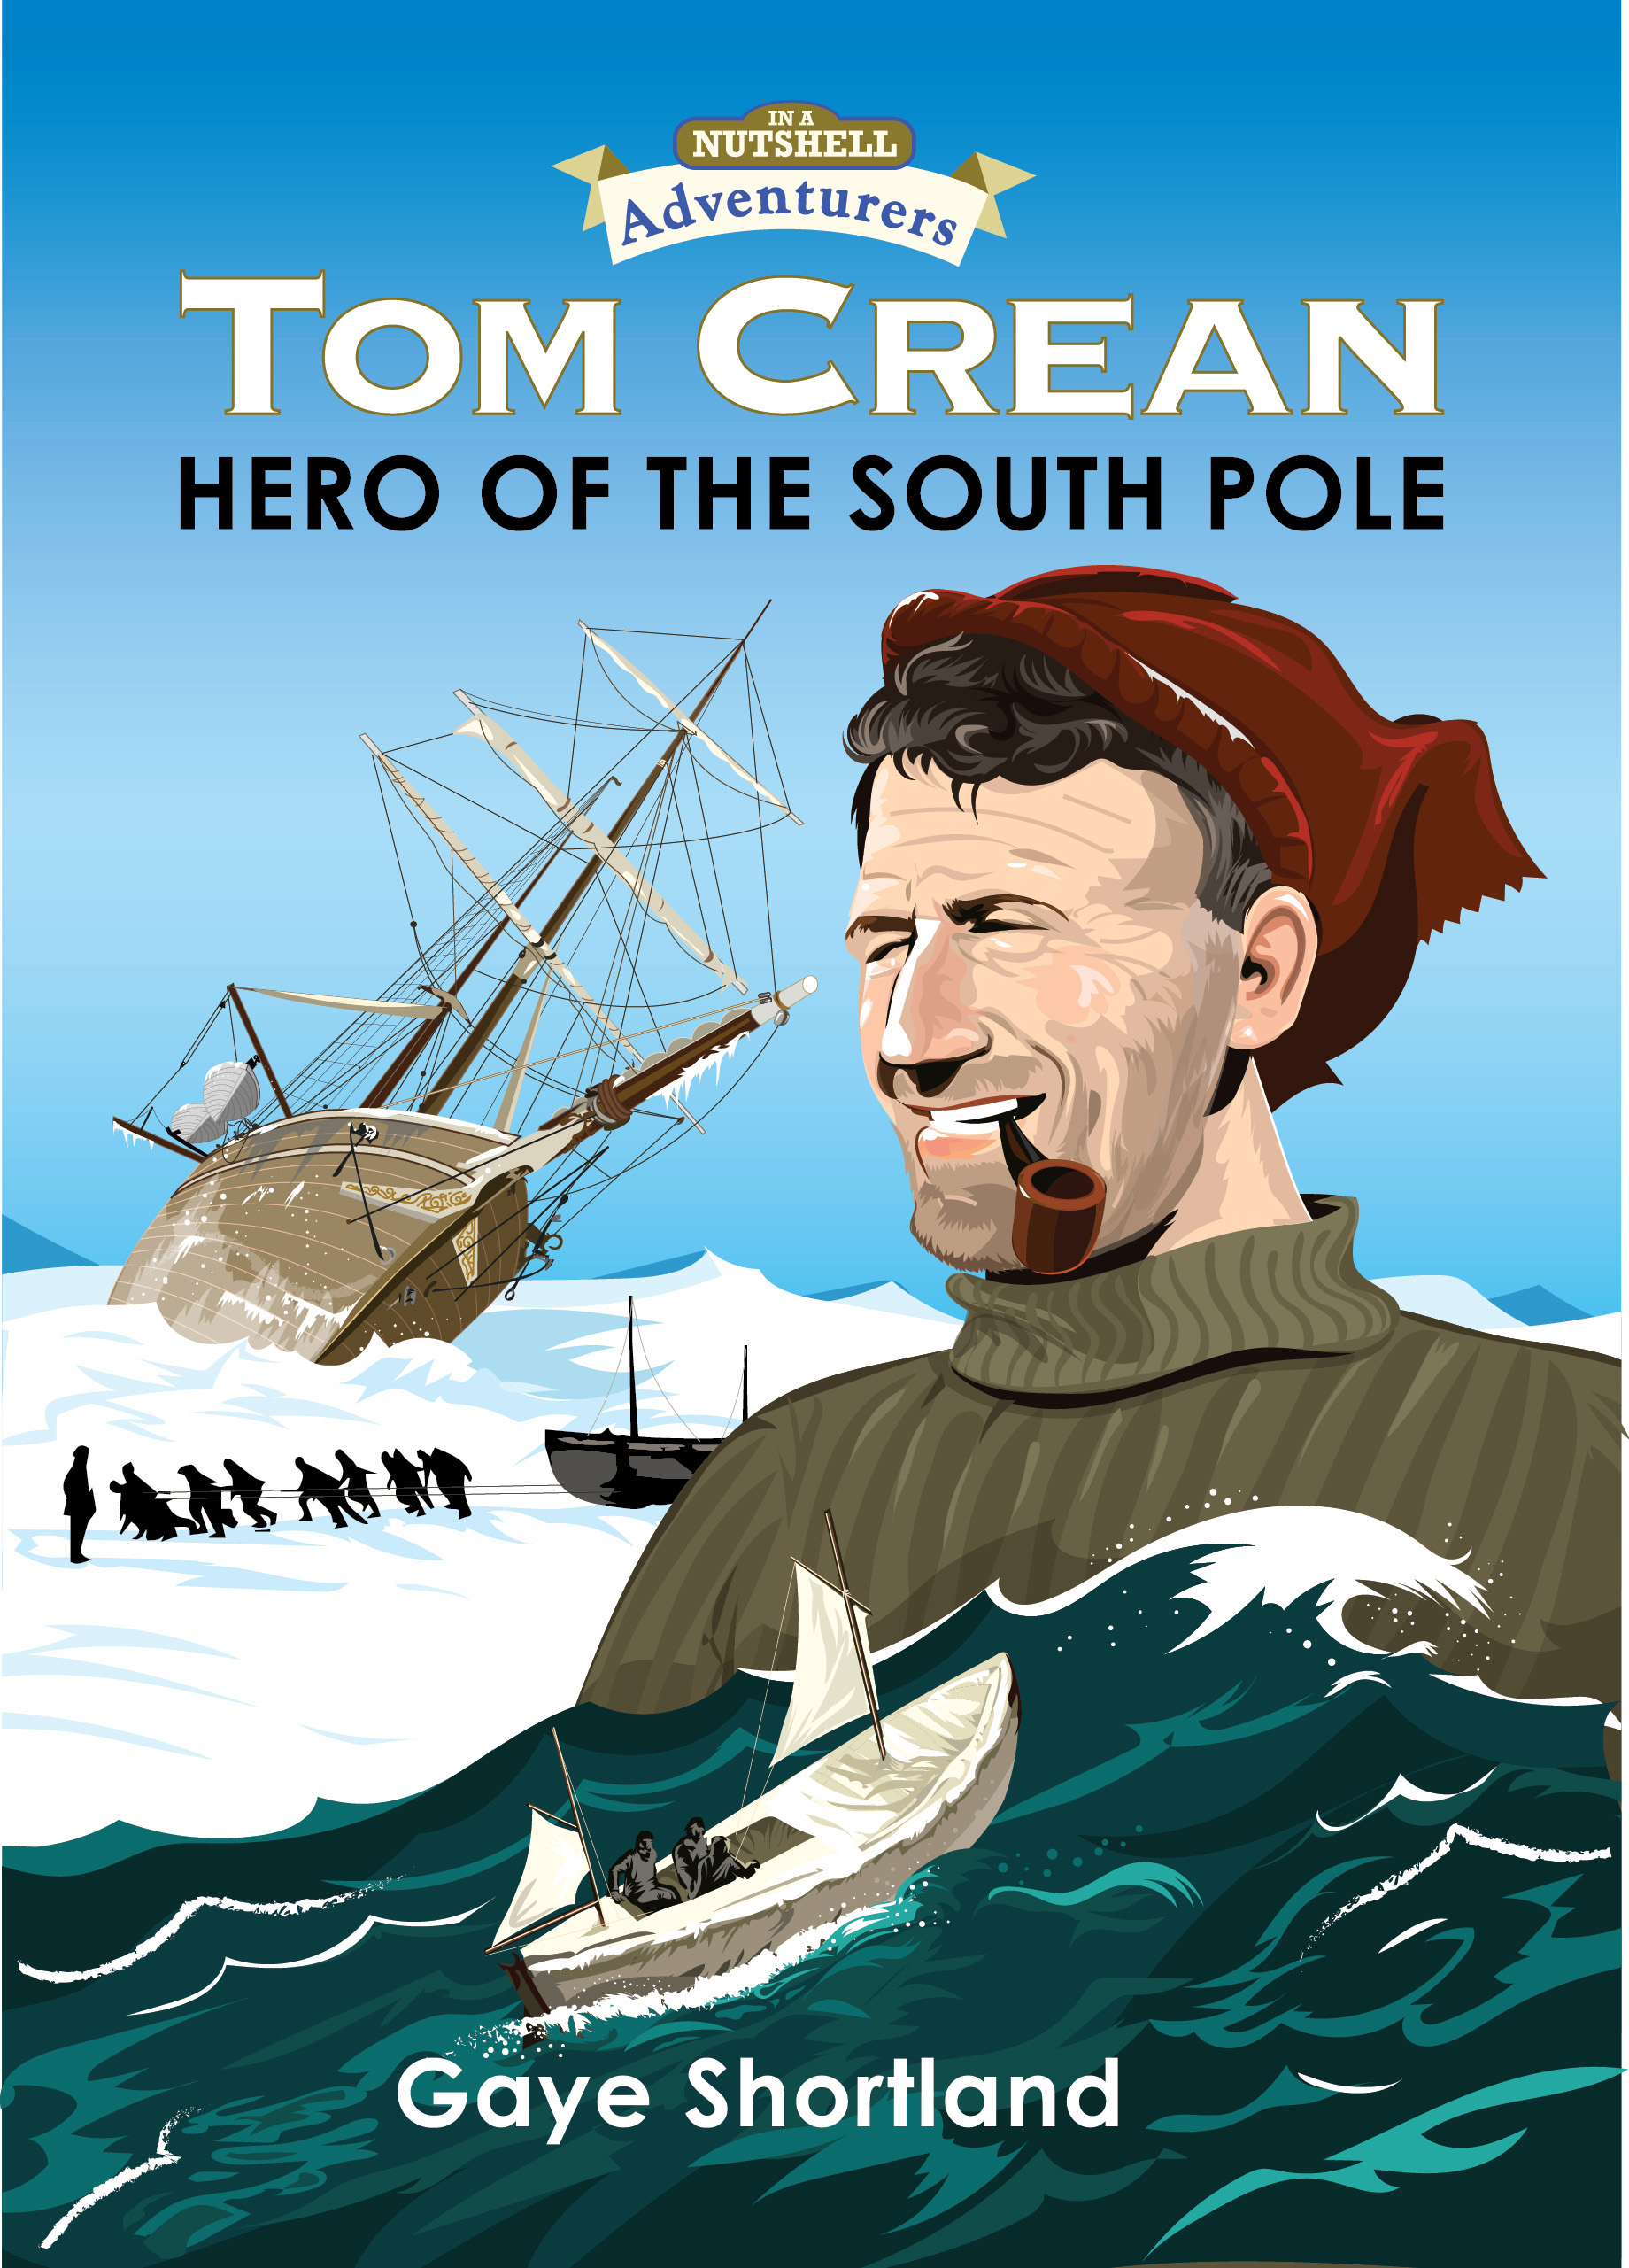 Tom Crean: Hero Of The South Pole (In a Nutshell Adventurers)